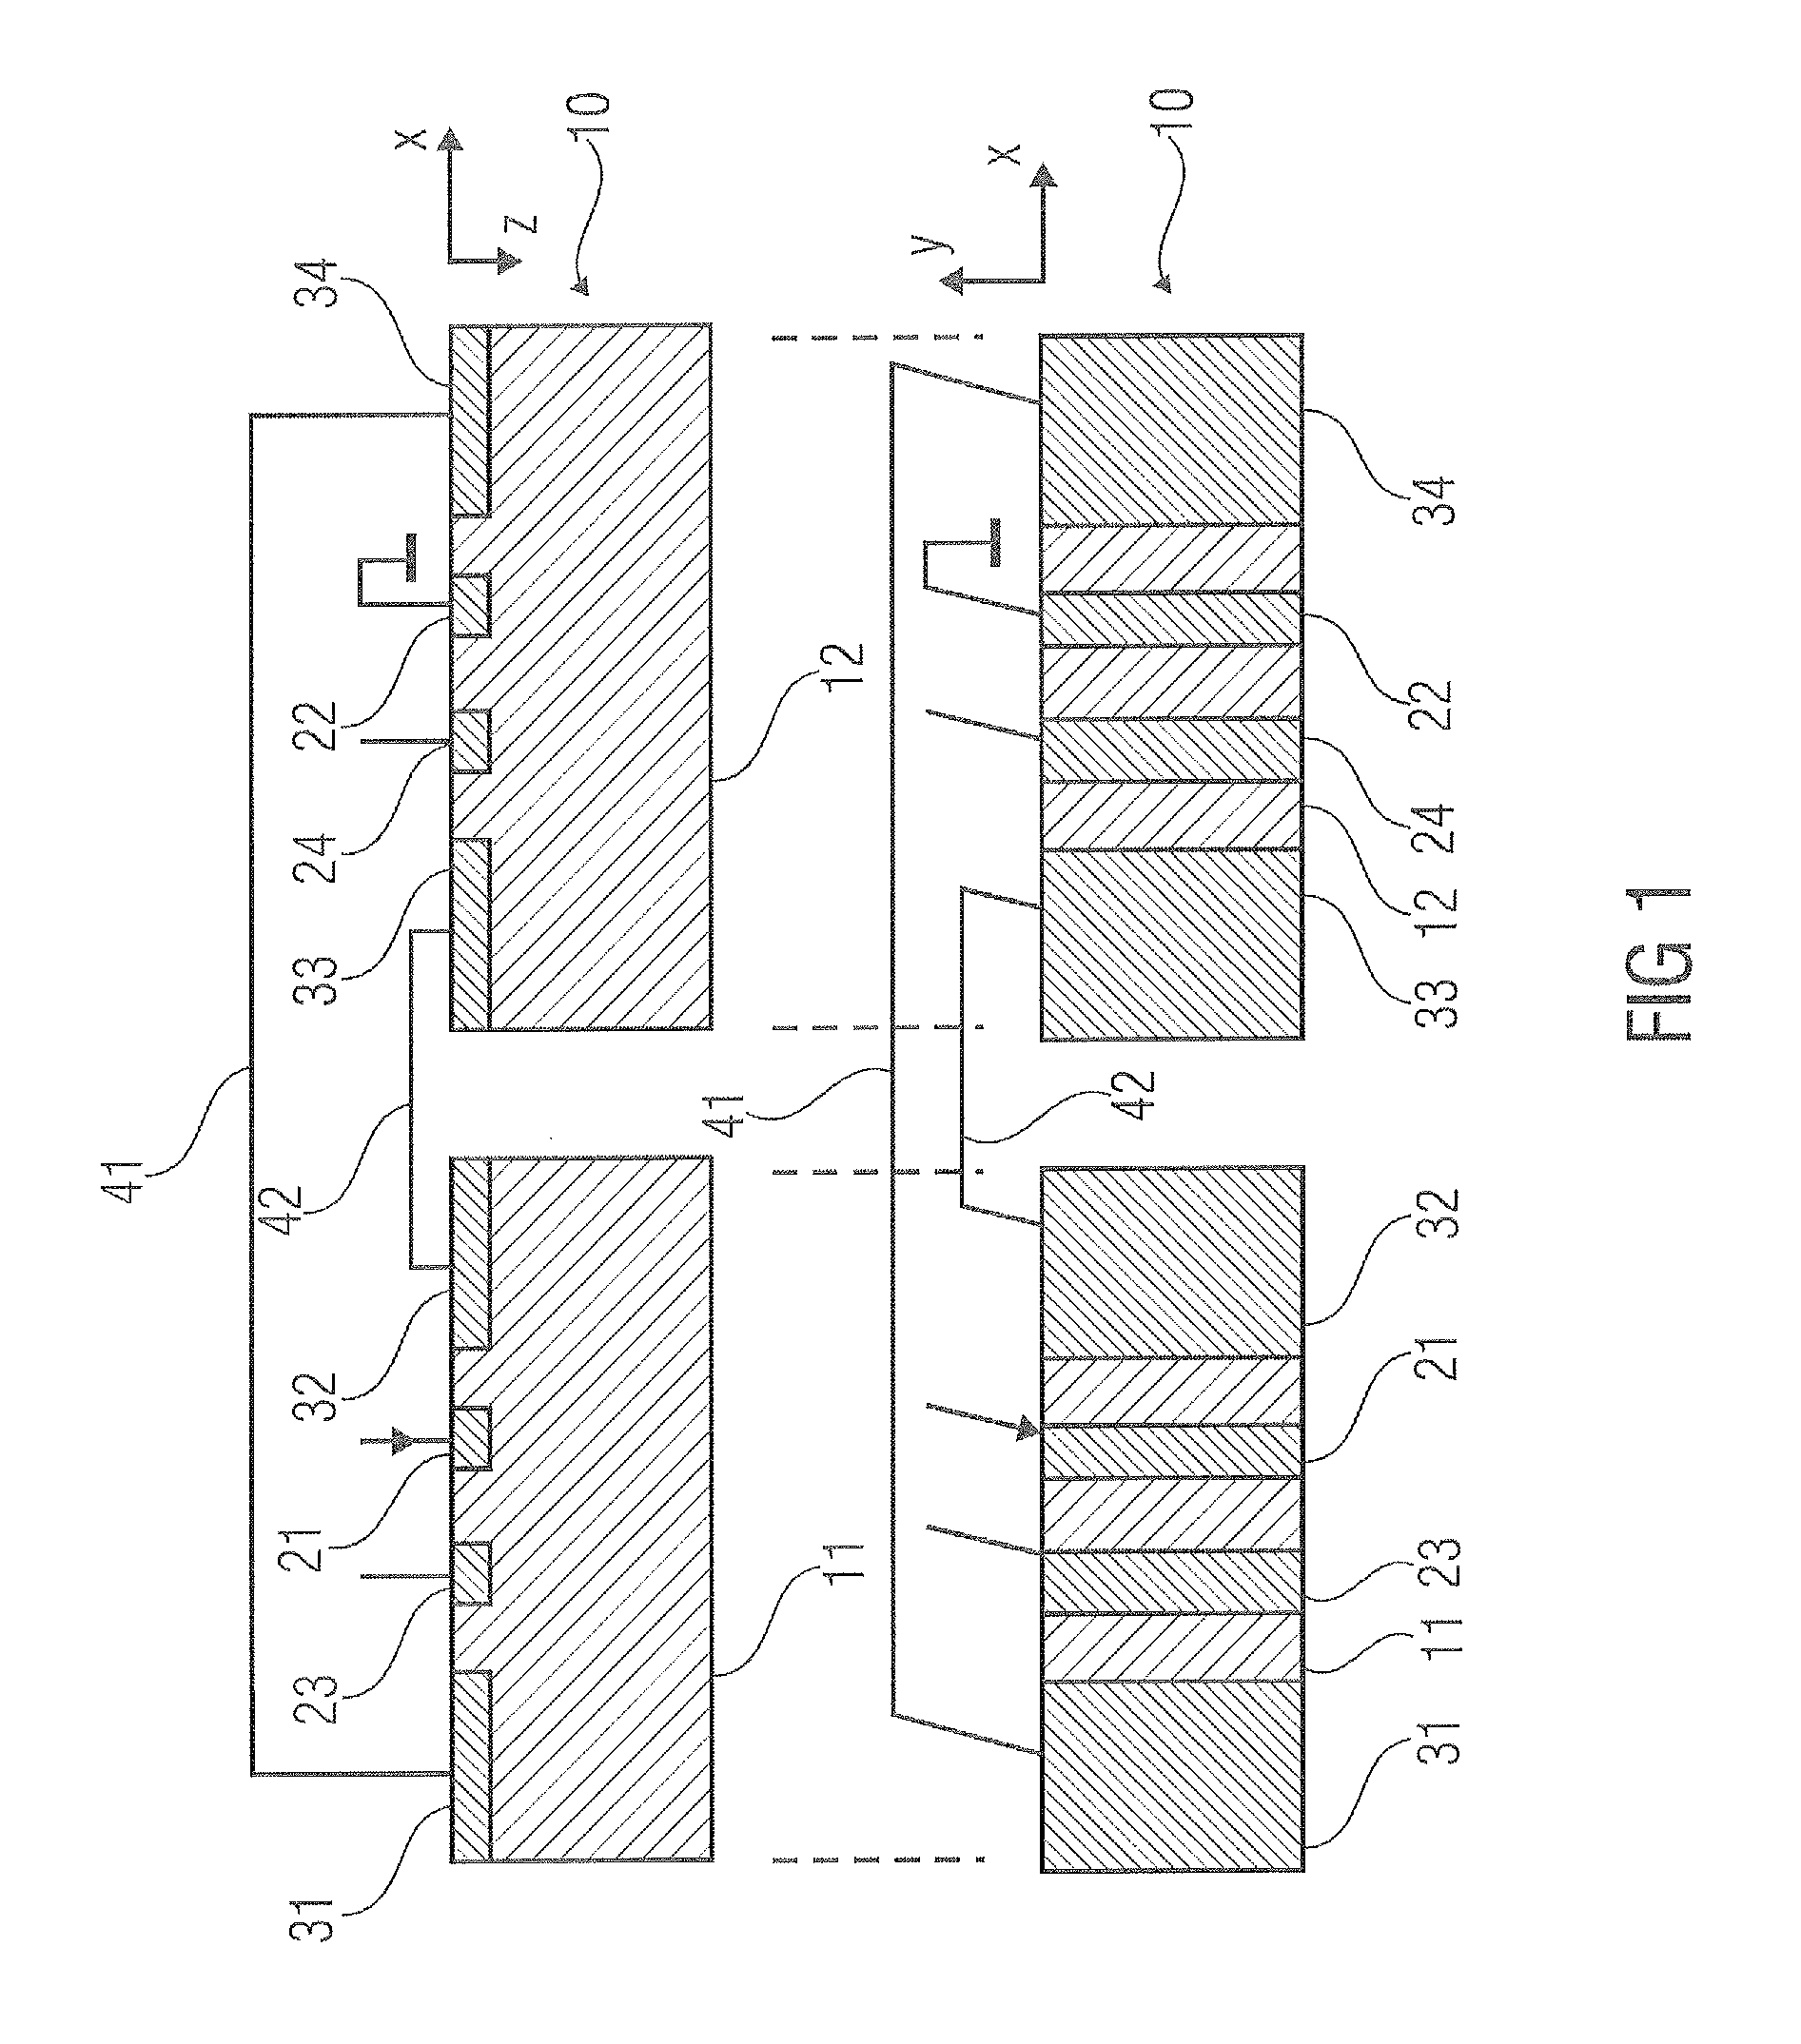 Electronic device with ring-connected hall effect regions